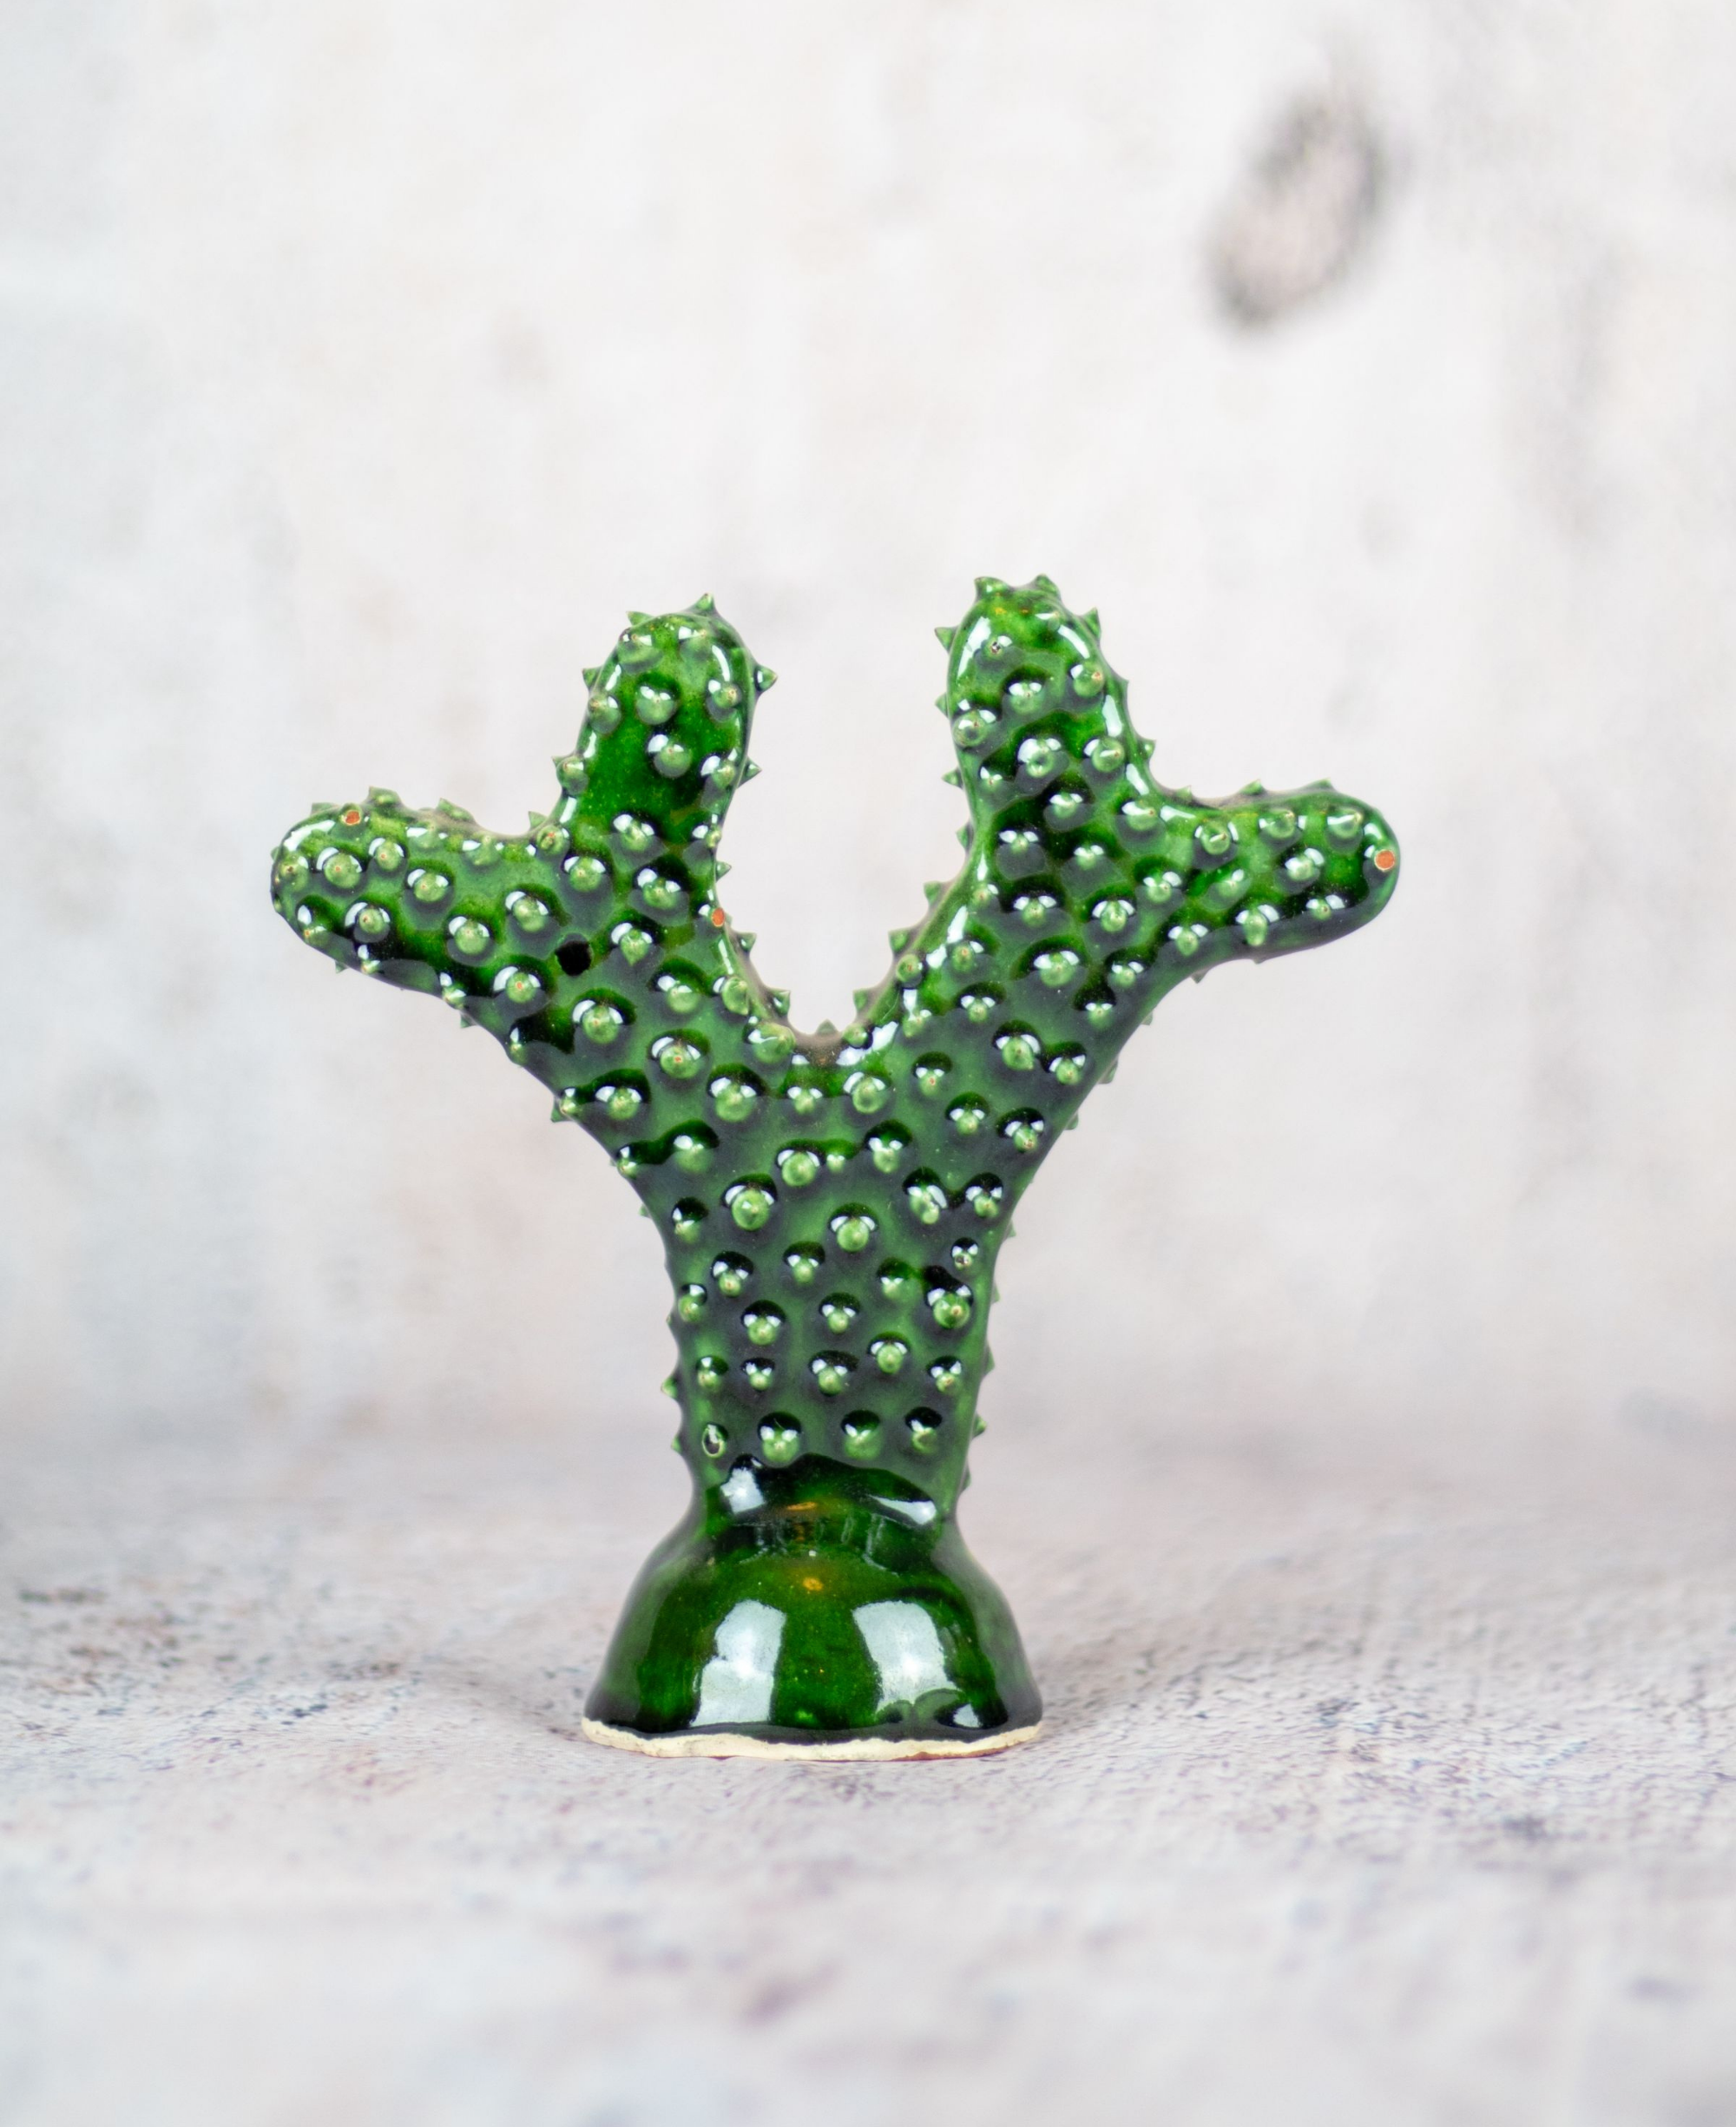 Prickly Pear Handmade Pottery Ornament - Cactus Gift - Ceramic Cacti - Ceramic Cactus - Prickly Pear Cactus - Tamegroute Pottery